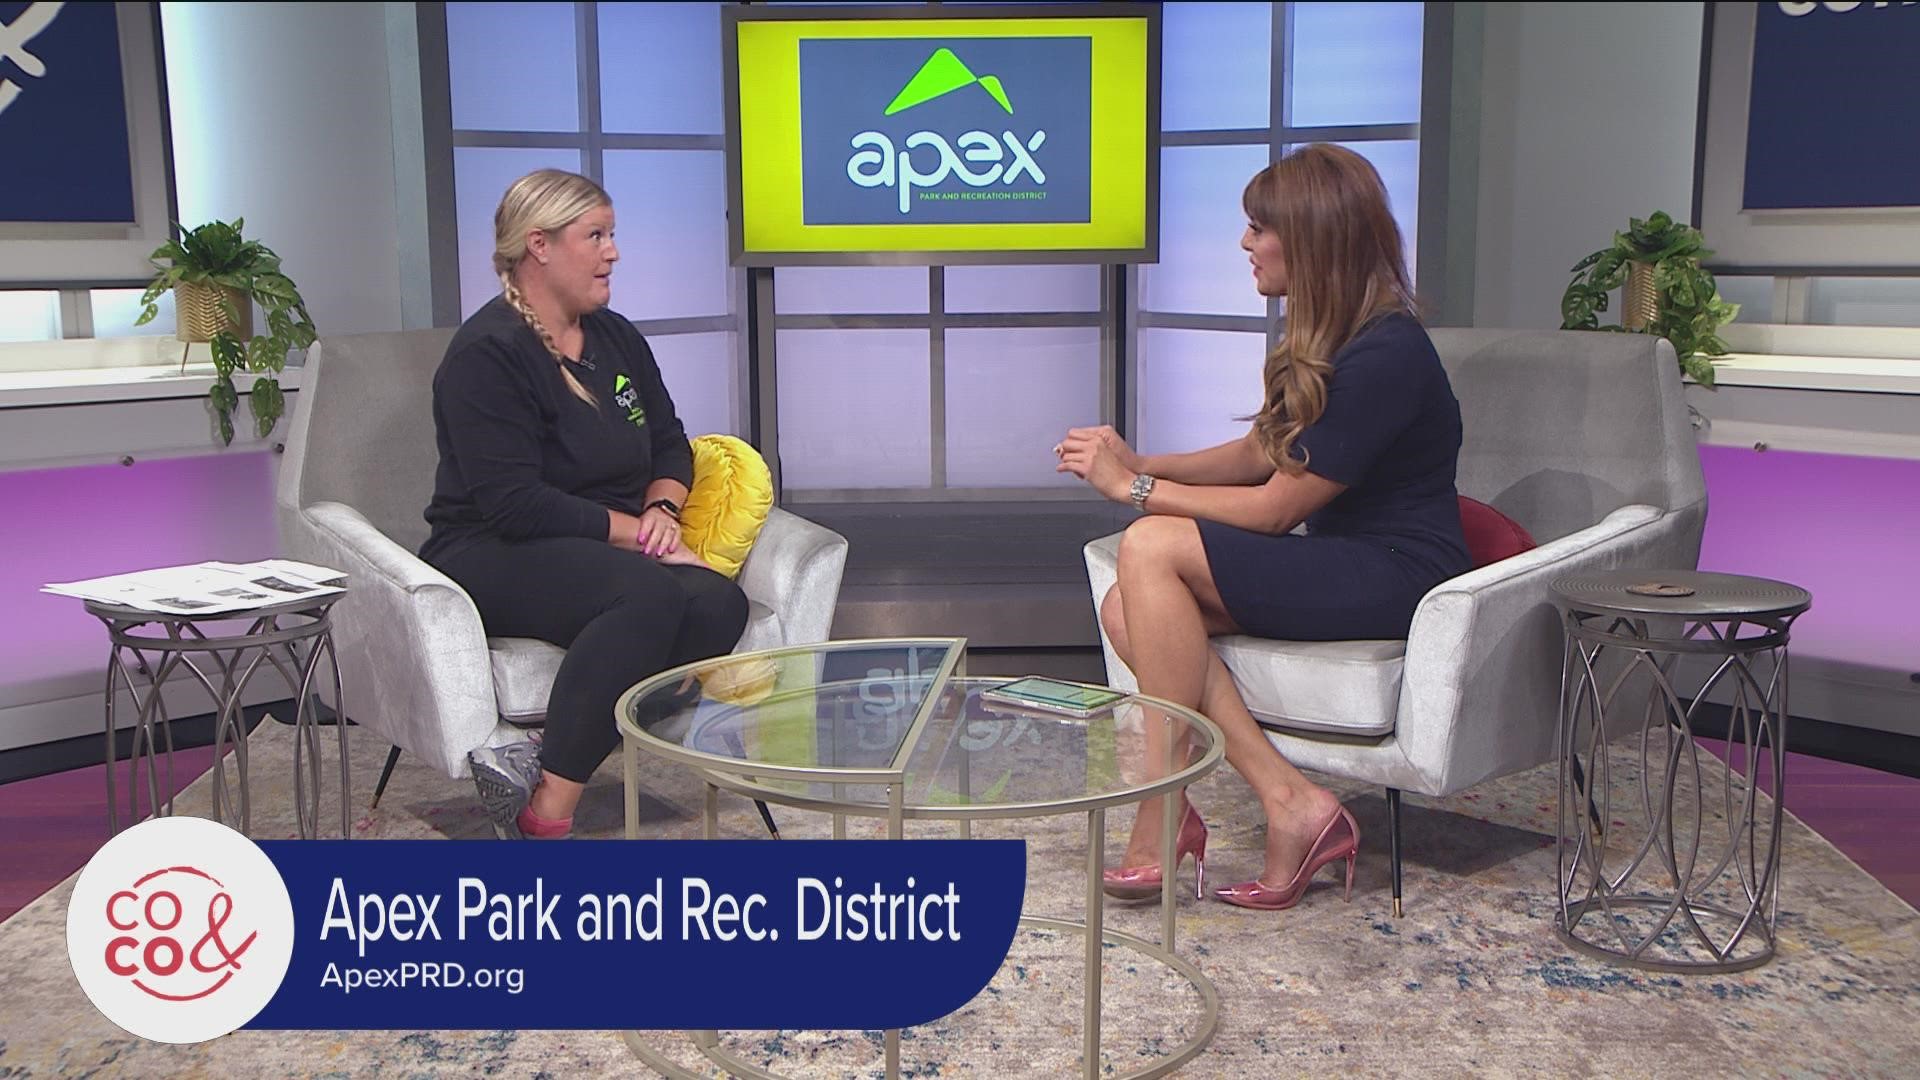 Plan your summer with Apex Park and Recreation District. Learn more at ApexPRD.org.